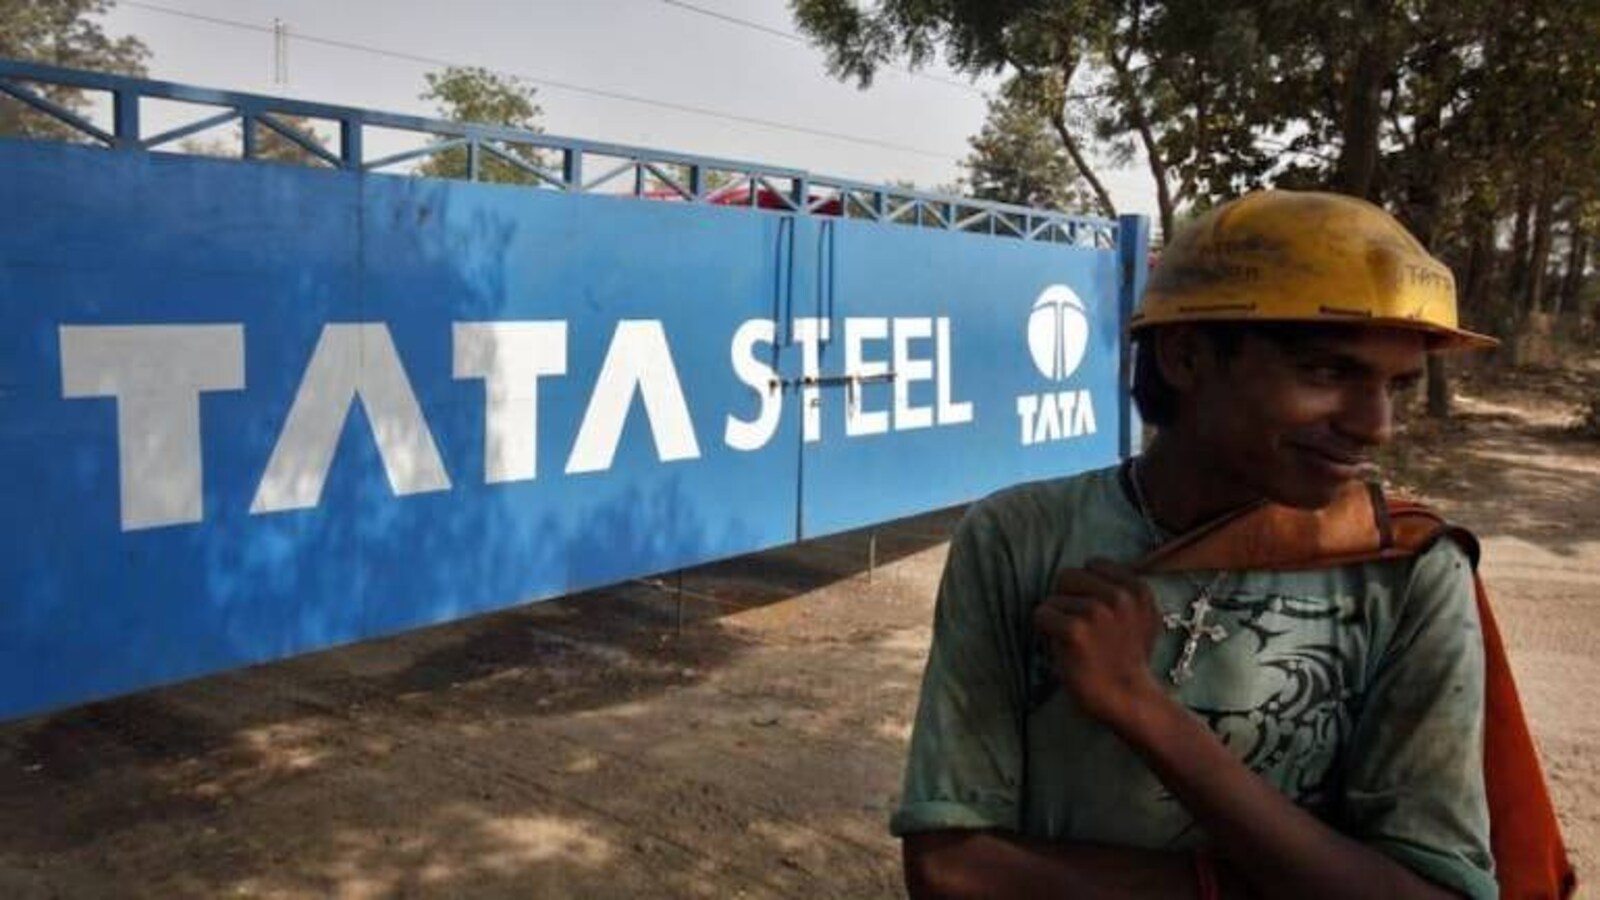 Council Leader Expresses Concerns for Tata Steel Sustainability